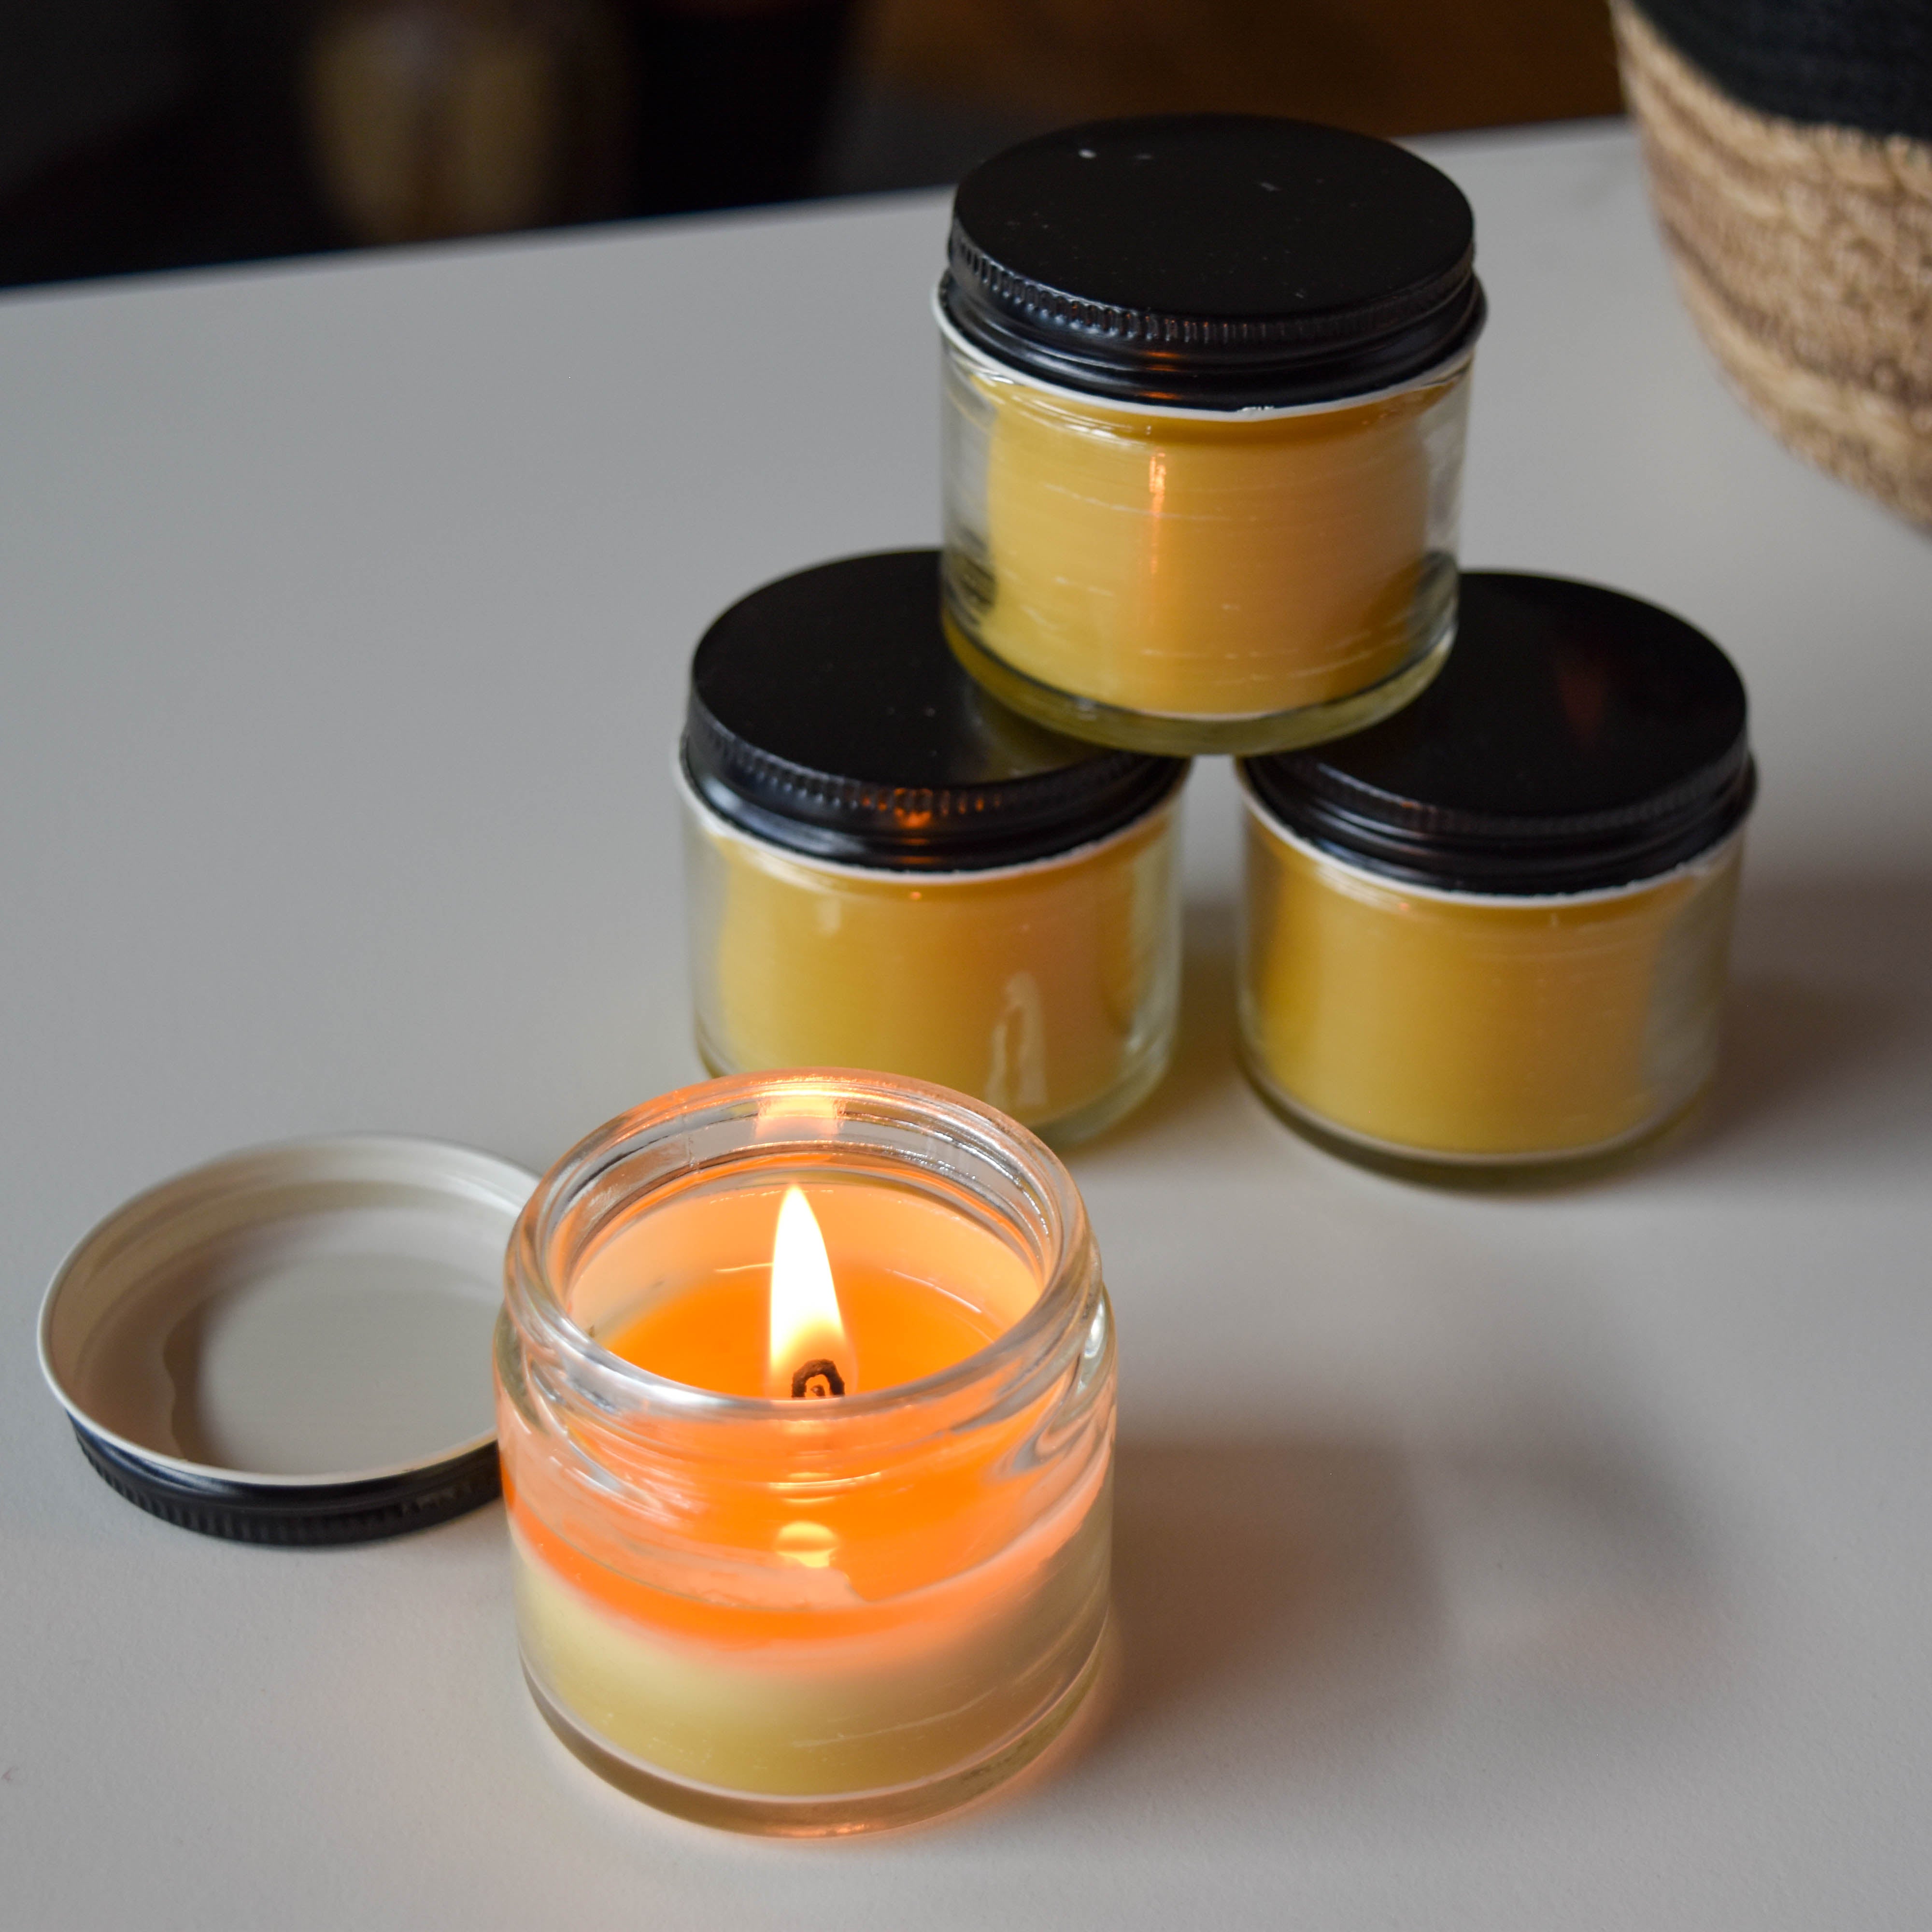 How to make natural beeswax candles